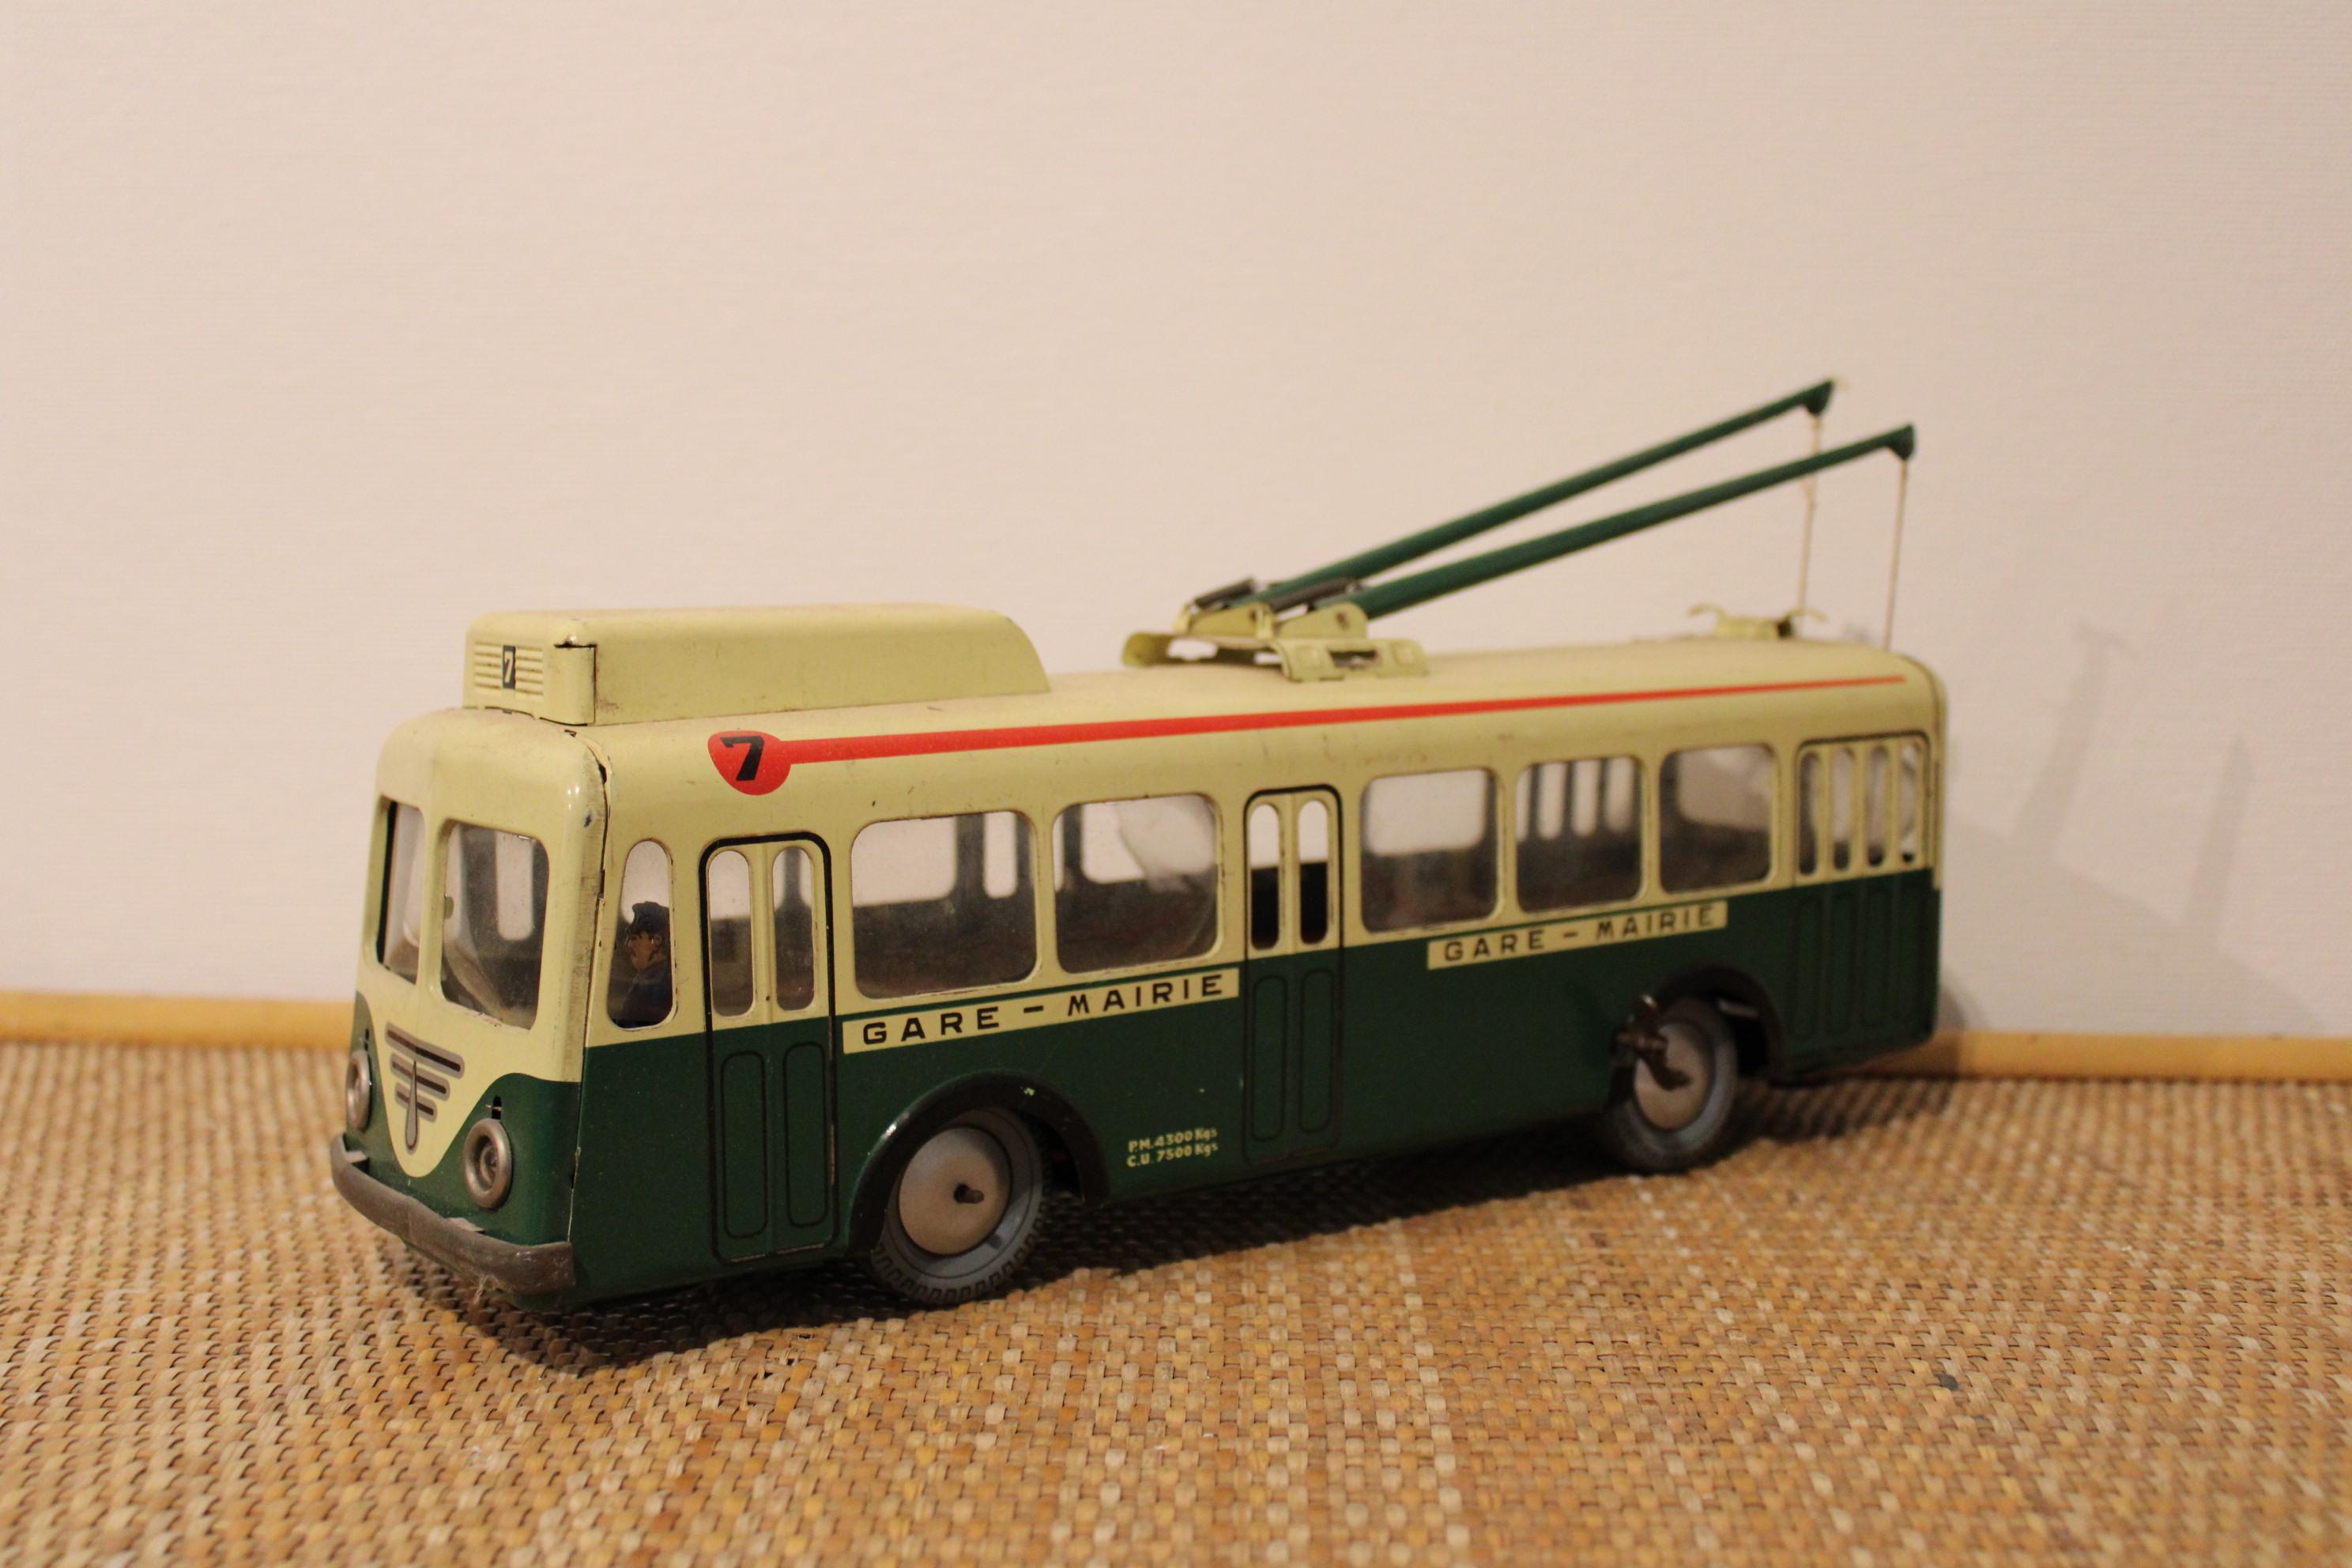 Trolley-bus from the French brand Joustra.
Old vintage toy, circa 1950.

A torn window (see photo).